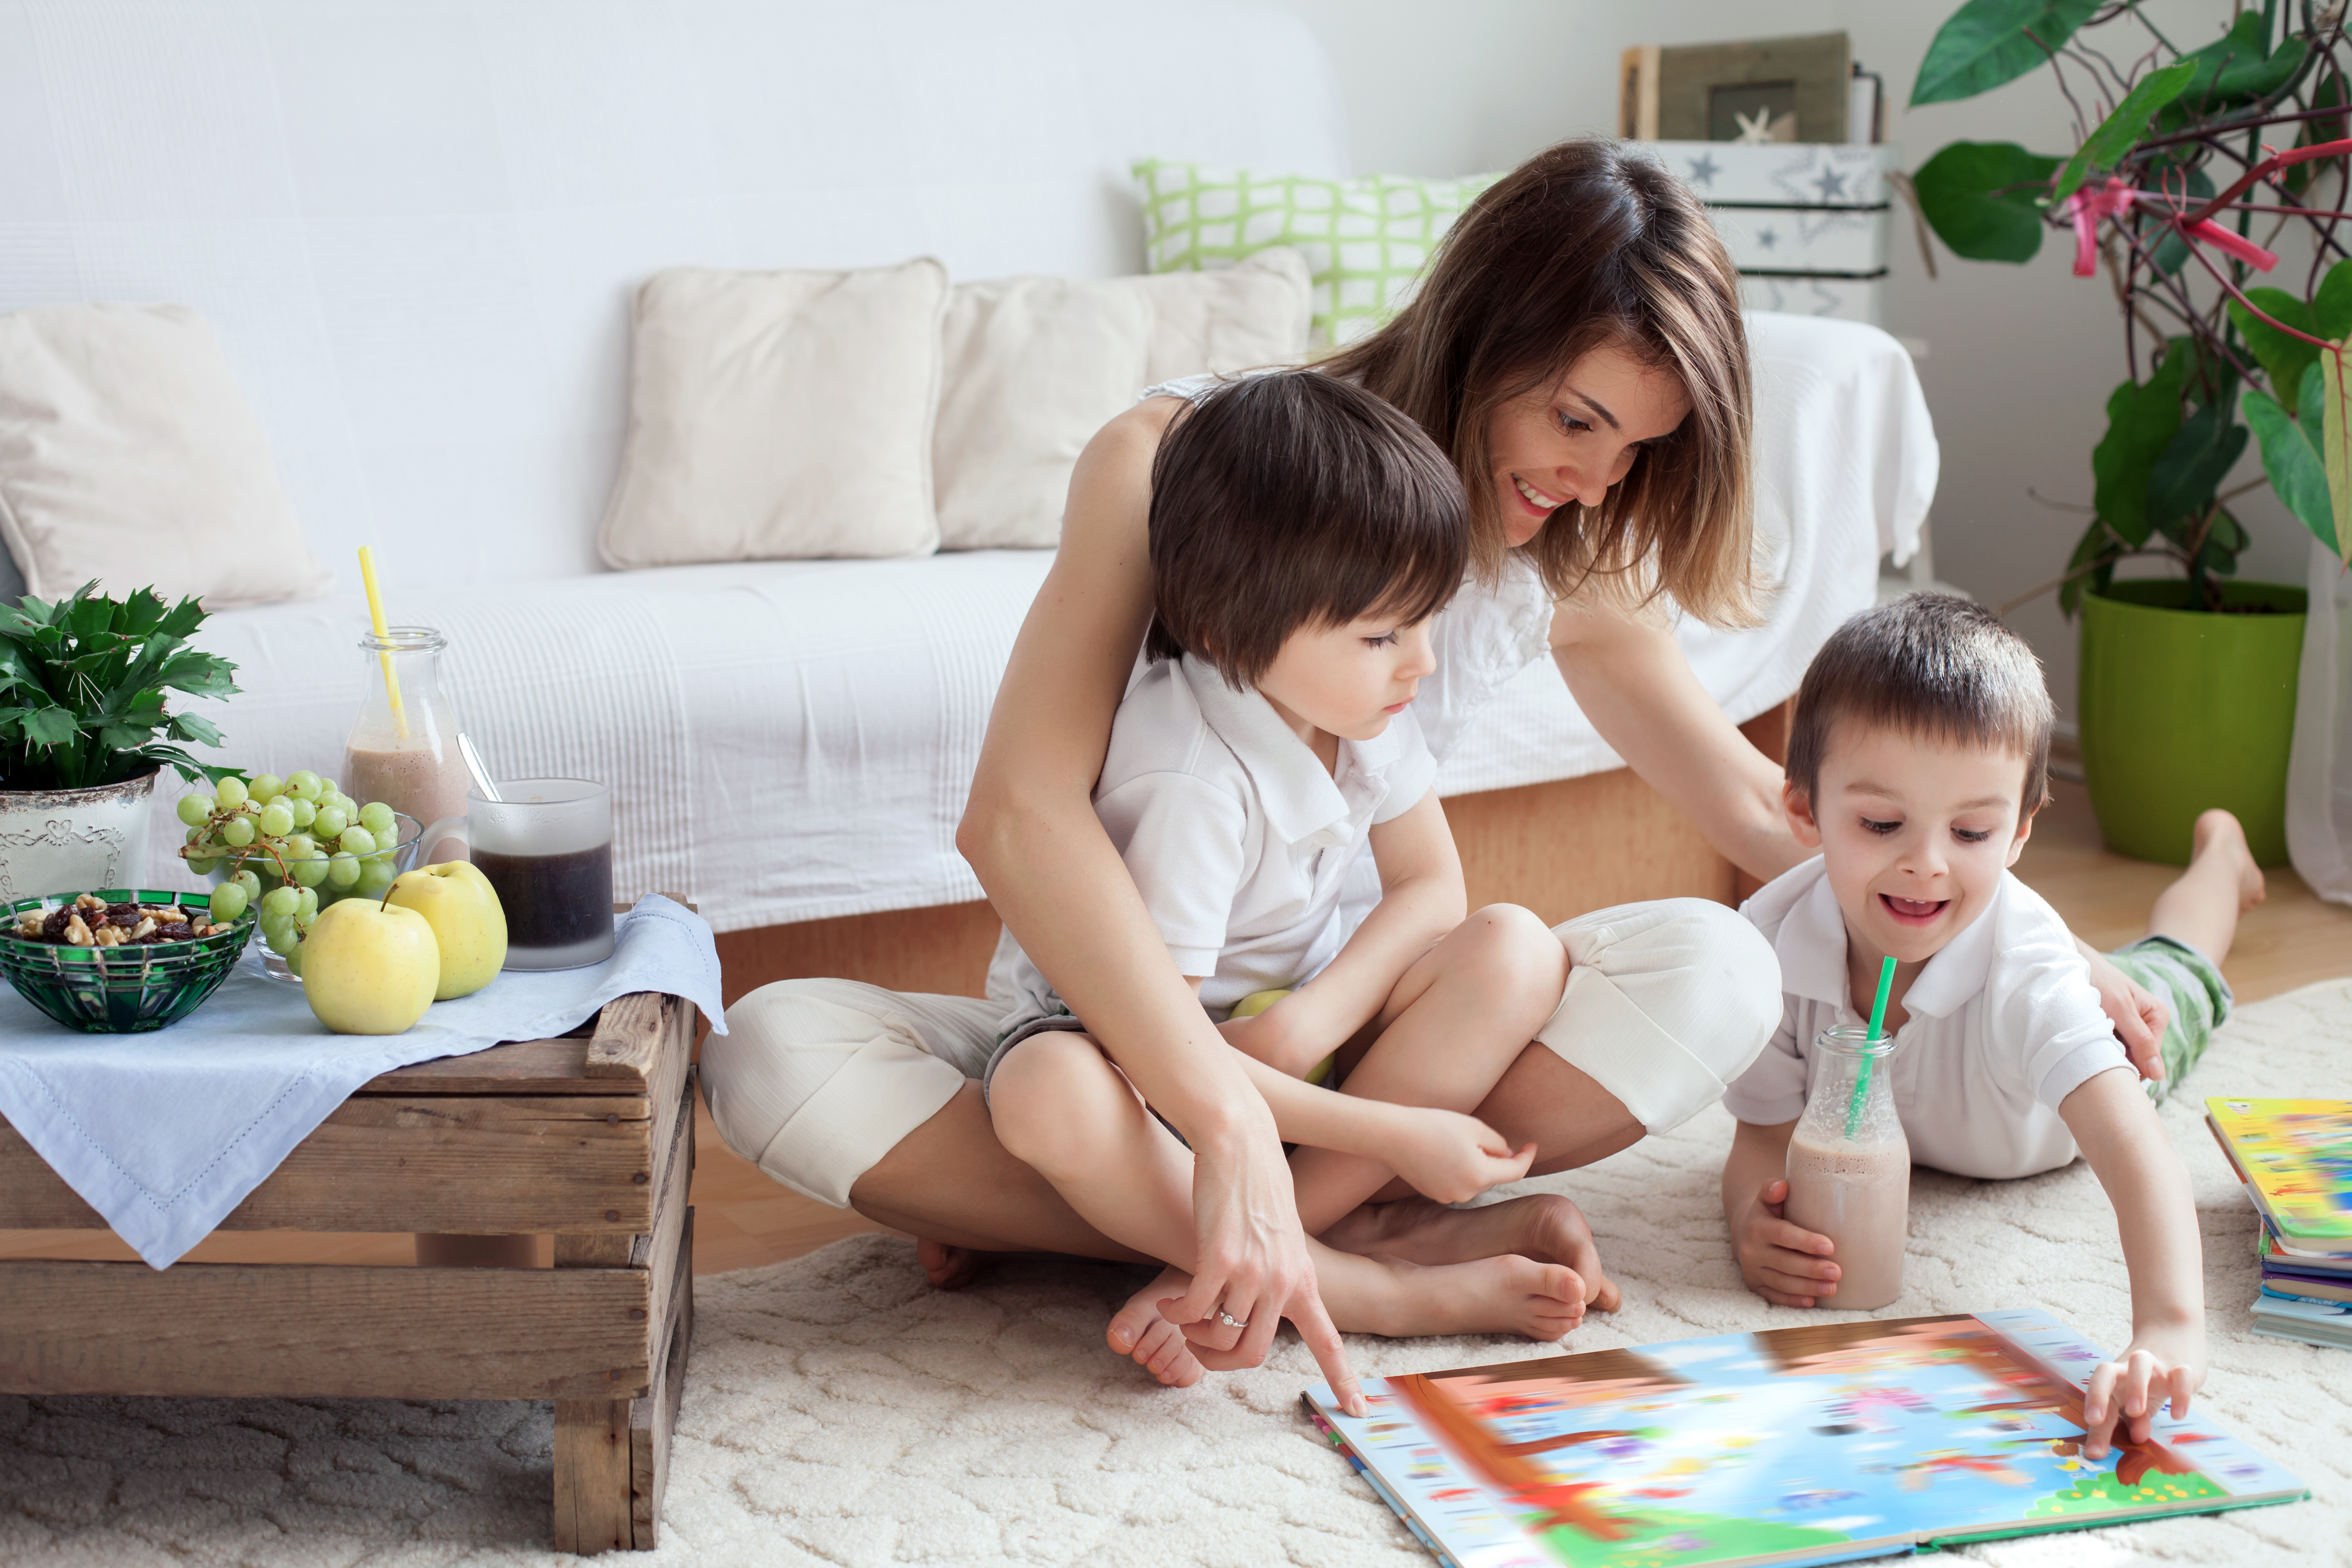 A woman on the floor reading a book with her two children | Source: Shutterstock